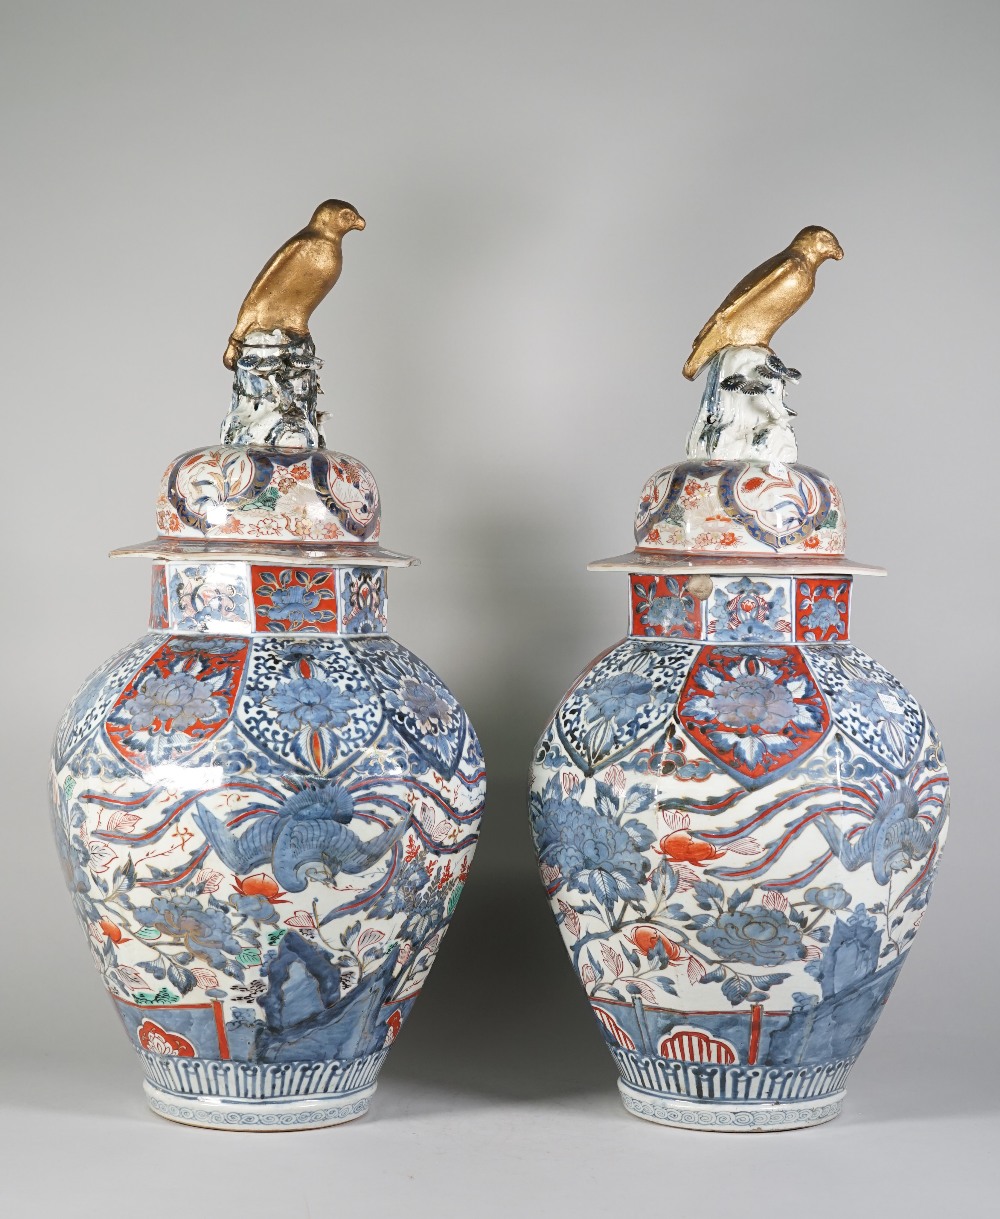 A large pair of Japanese Arita octagonal vases and covers, Edo period, circa 1700, - Image 3 of 8